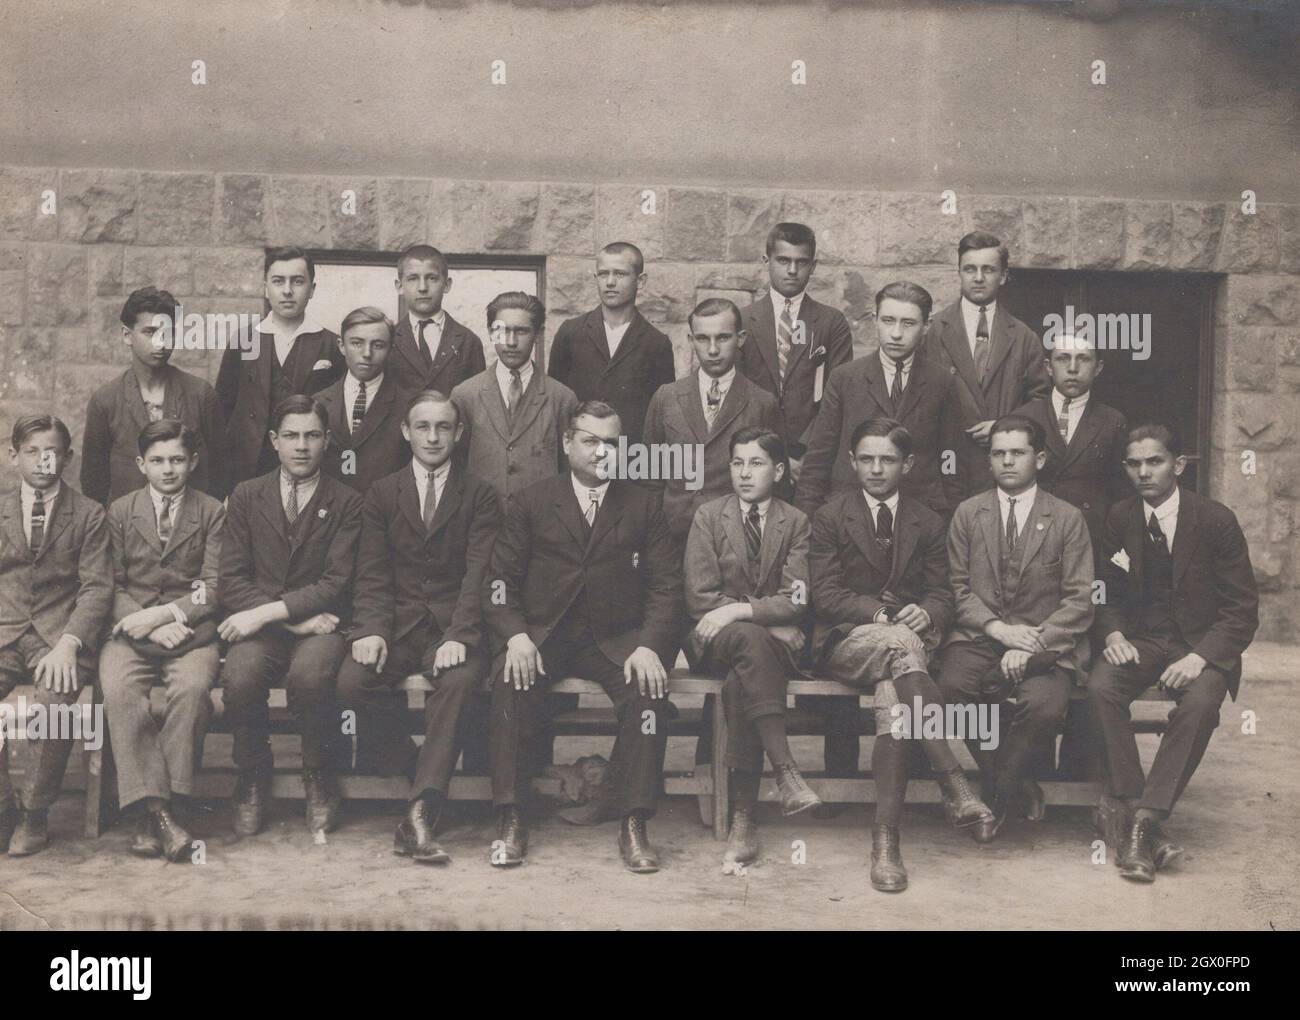 super rare vintage photo from the 1930's a Boys school class is visible at this photo. They are approximately 14-15 years old. Them teacher ( who is very dignified person blind in one eye) has got only one eye. He is a monocular or one-eyed person who has got a order of valor, or in hungarian order of Vitez medal. This medal was quite honorable at the Horthy's regime in Hungary. Period: 1930's Source: original photograph Stock Photo